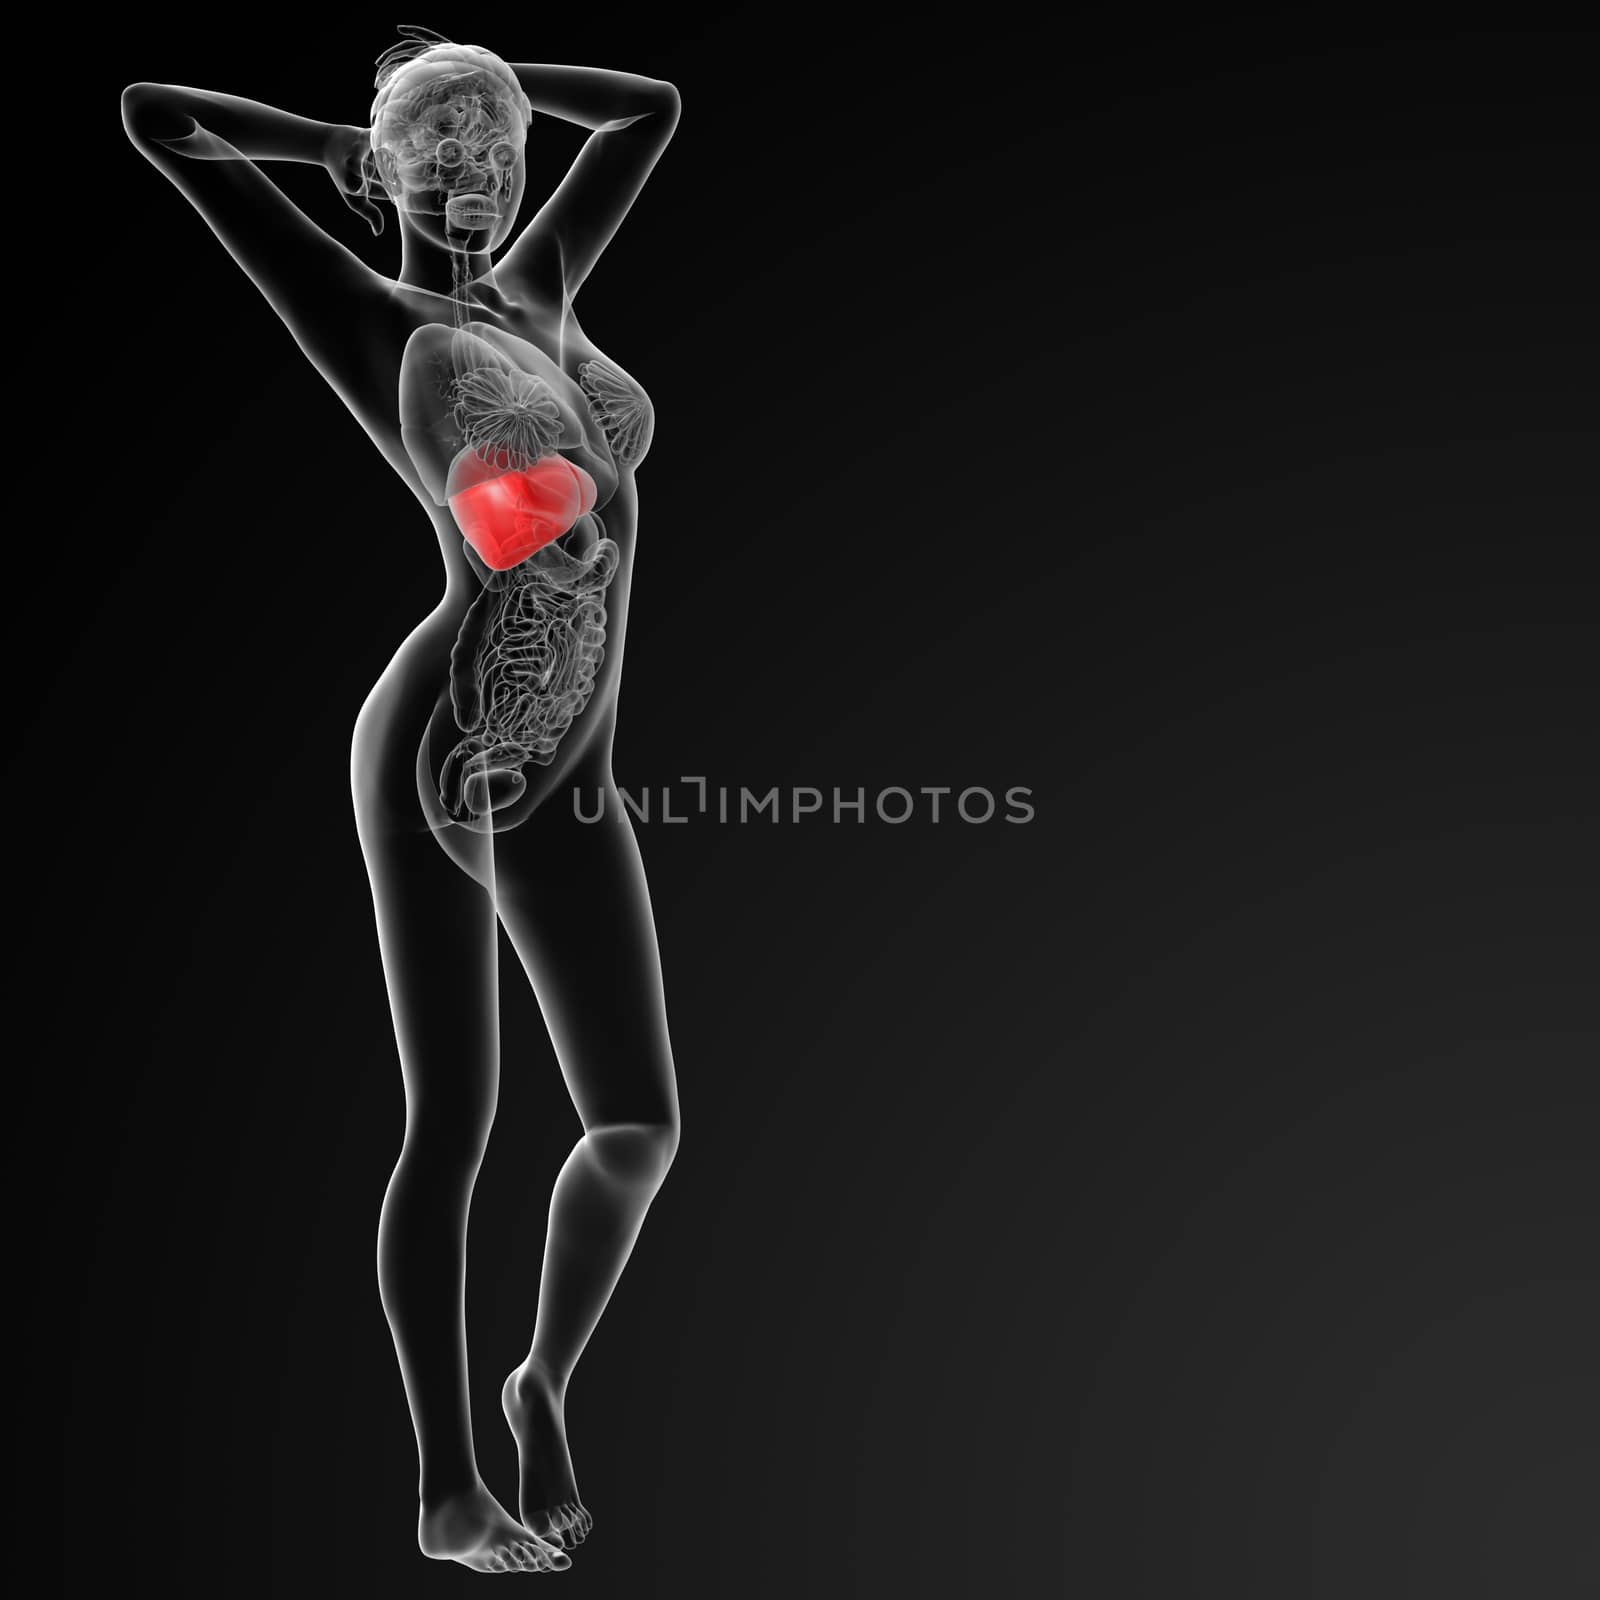 3d rendered illustration of the female liver - side view